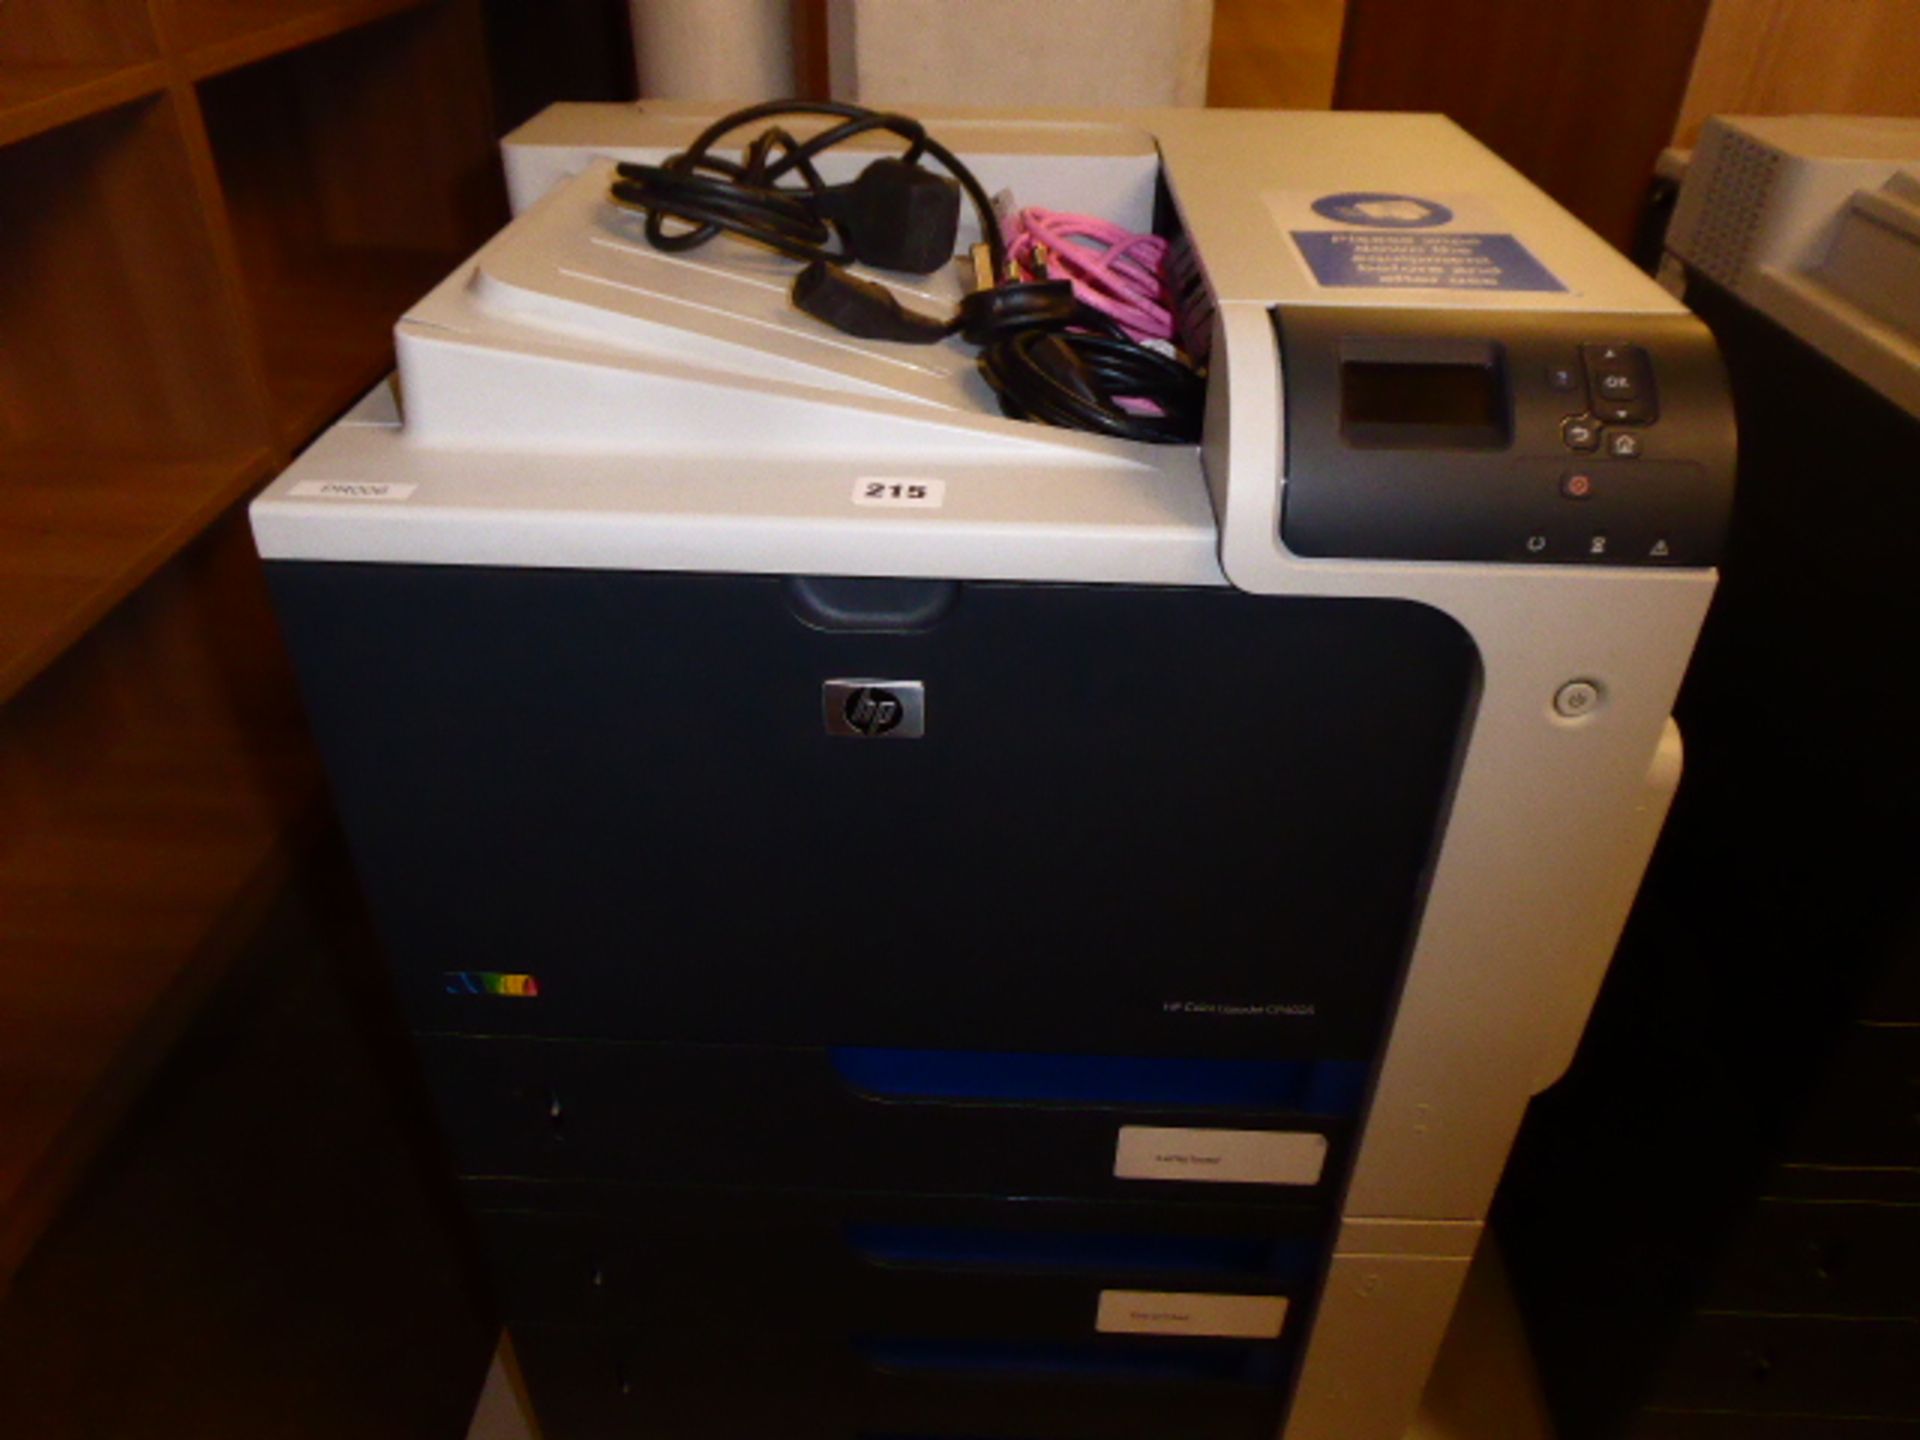 191 - HP Color Laserjet CP4025 printer with 5 paper loading stations on mobile trolley - Image 2 of 2